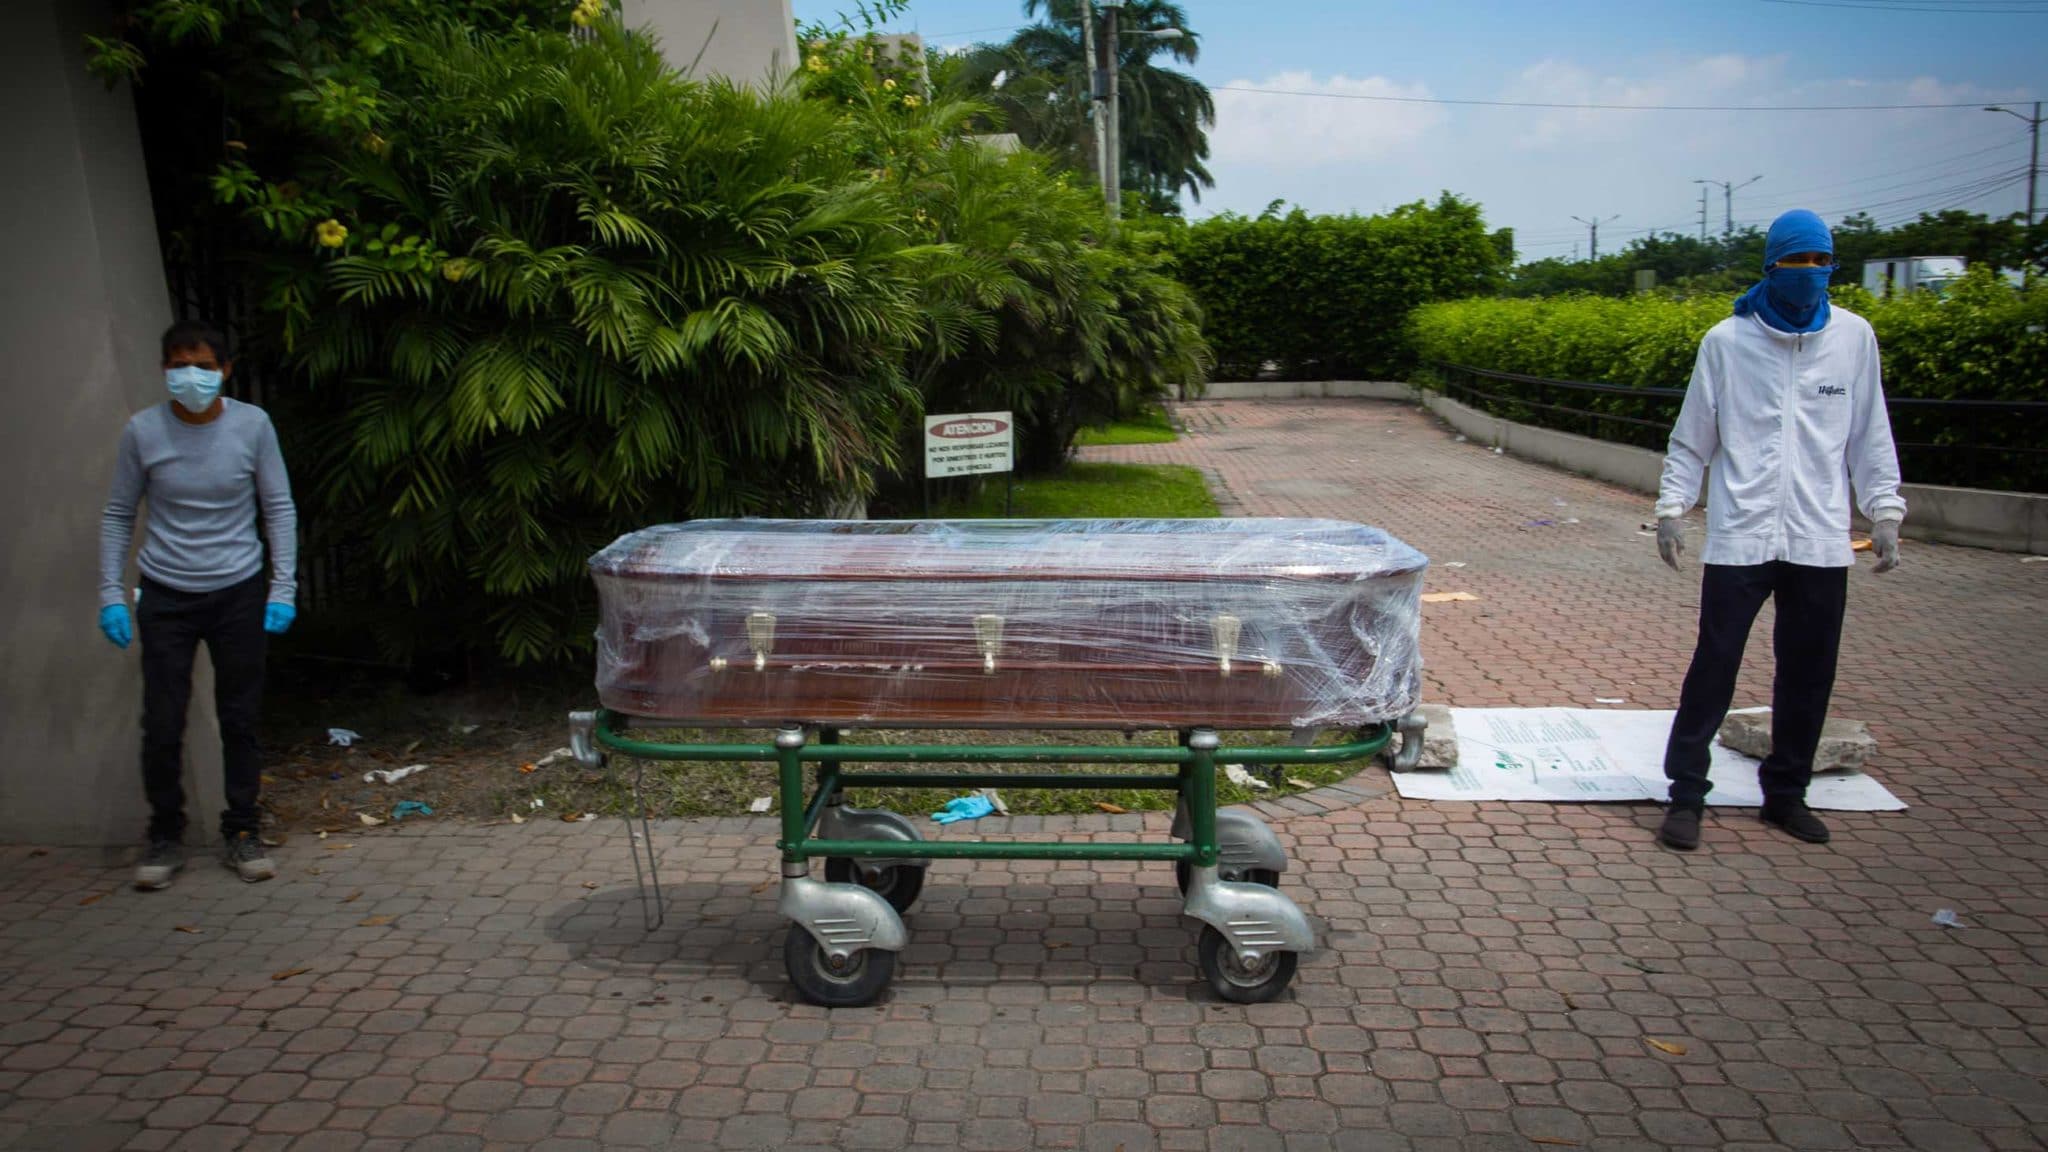 Two men stand outside the Parque de la Aurora cemetery in Guayaquil with a coffin holding a deceased family member. All images by Iván Castaneira for Undark.